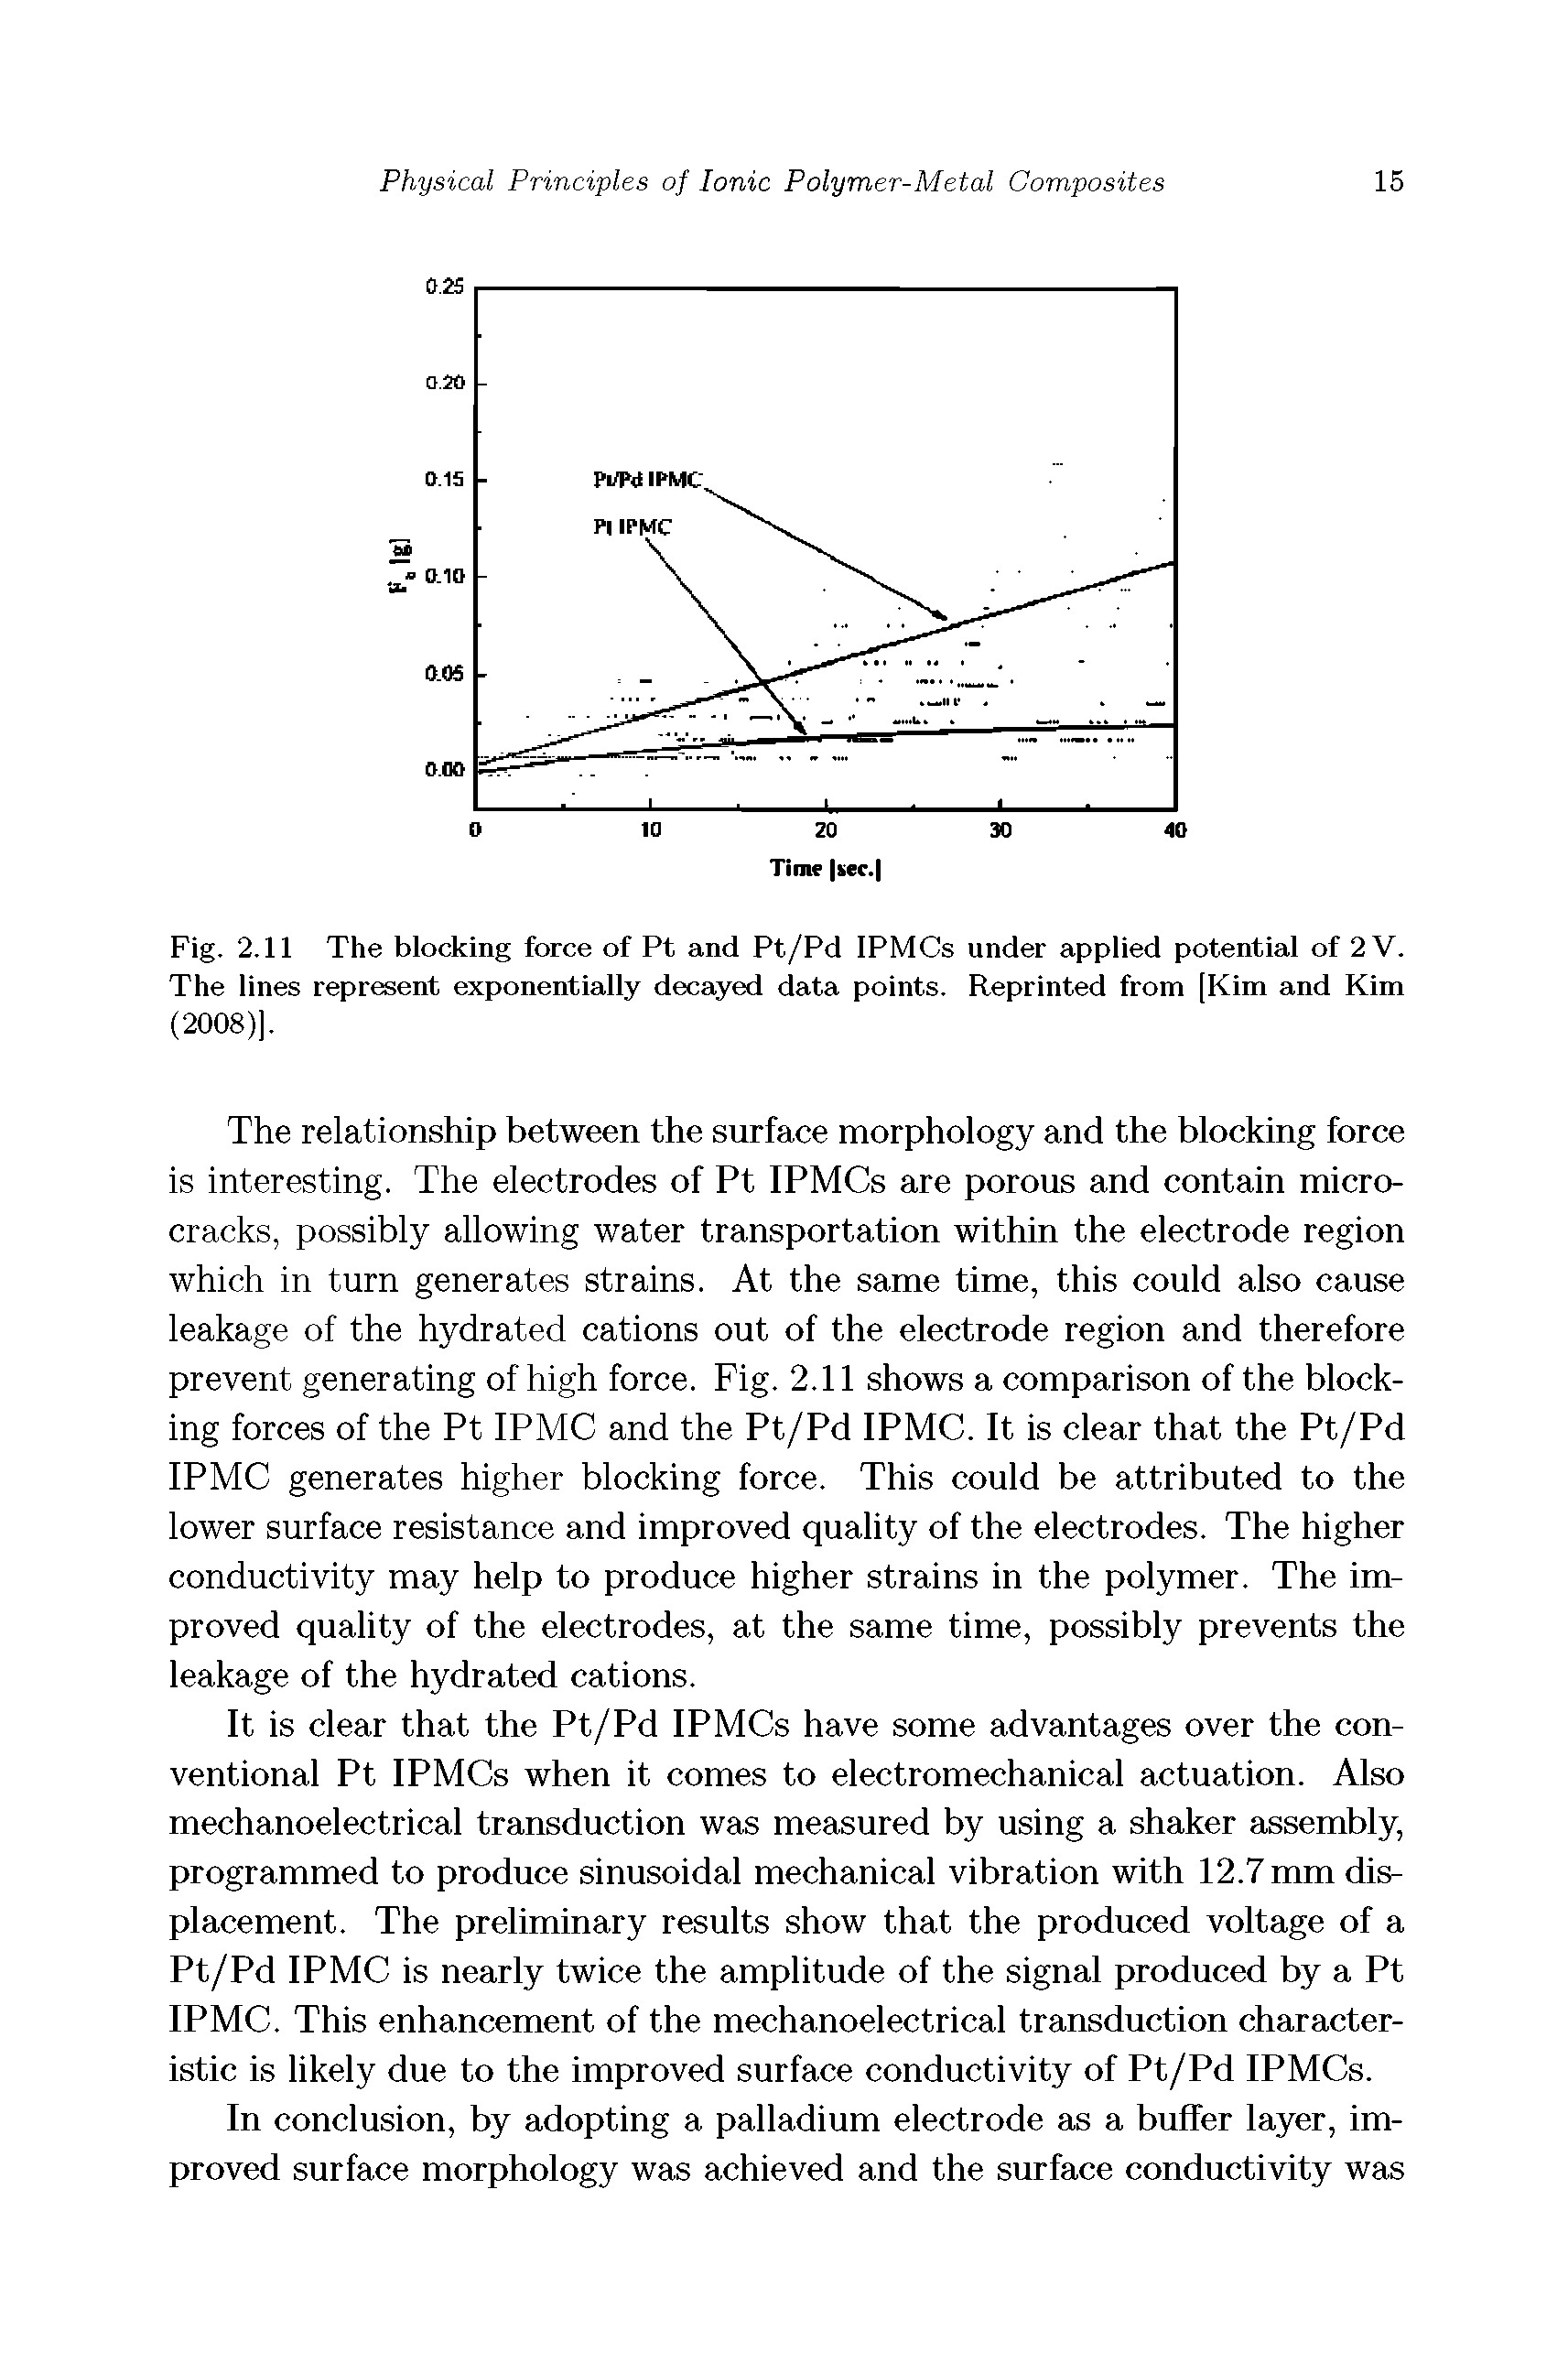 Fig. 2.11 The blocking force of Pt and Pt/Pd IPMCs under applied potential of 2V. The lines represent exponentially decayed data points. Reprinted from [Kim and Kim (2008)].